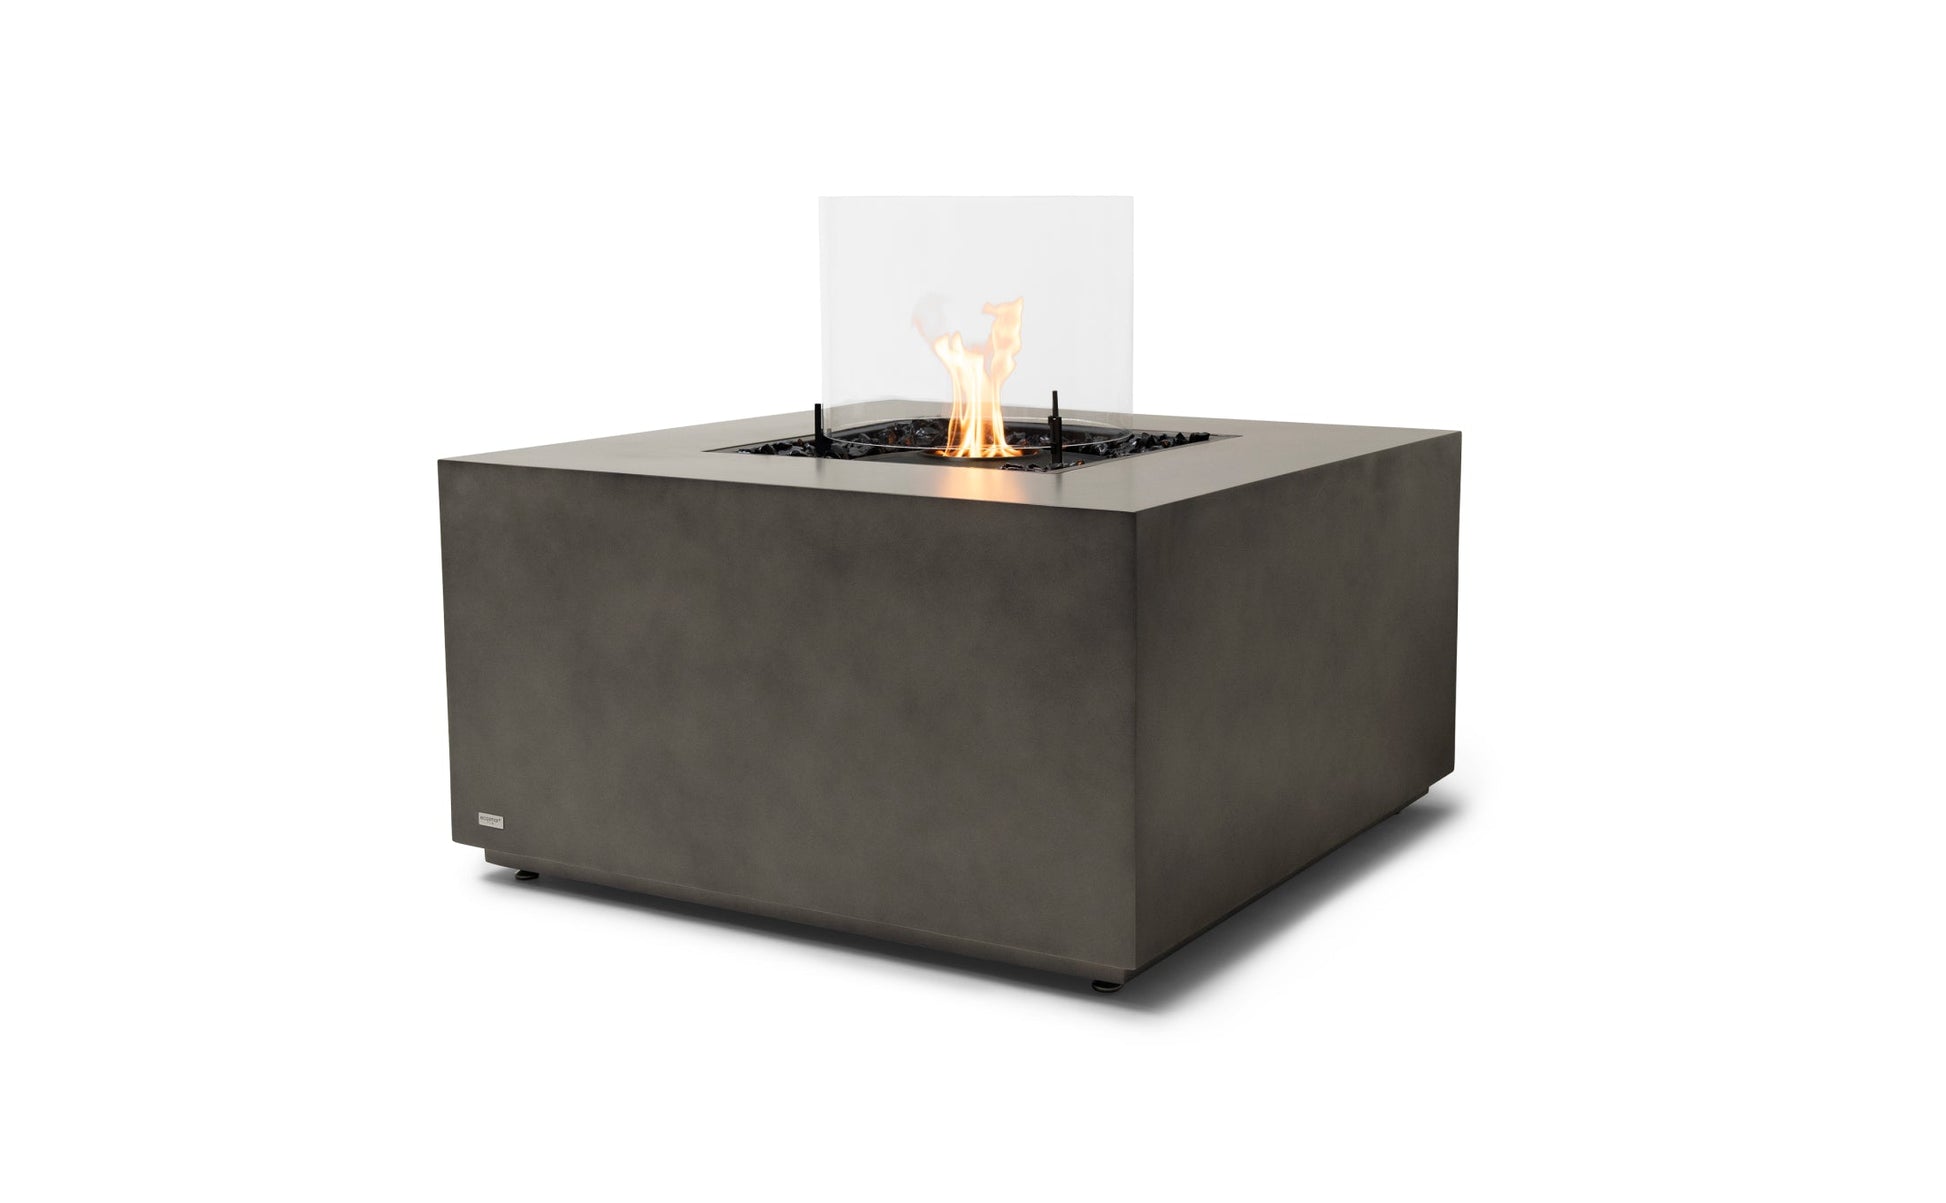 EcoSmart Fire CHASER 38" Natural Outdoor Fire Pit Table with Black Burner by Mad Design Group